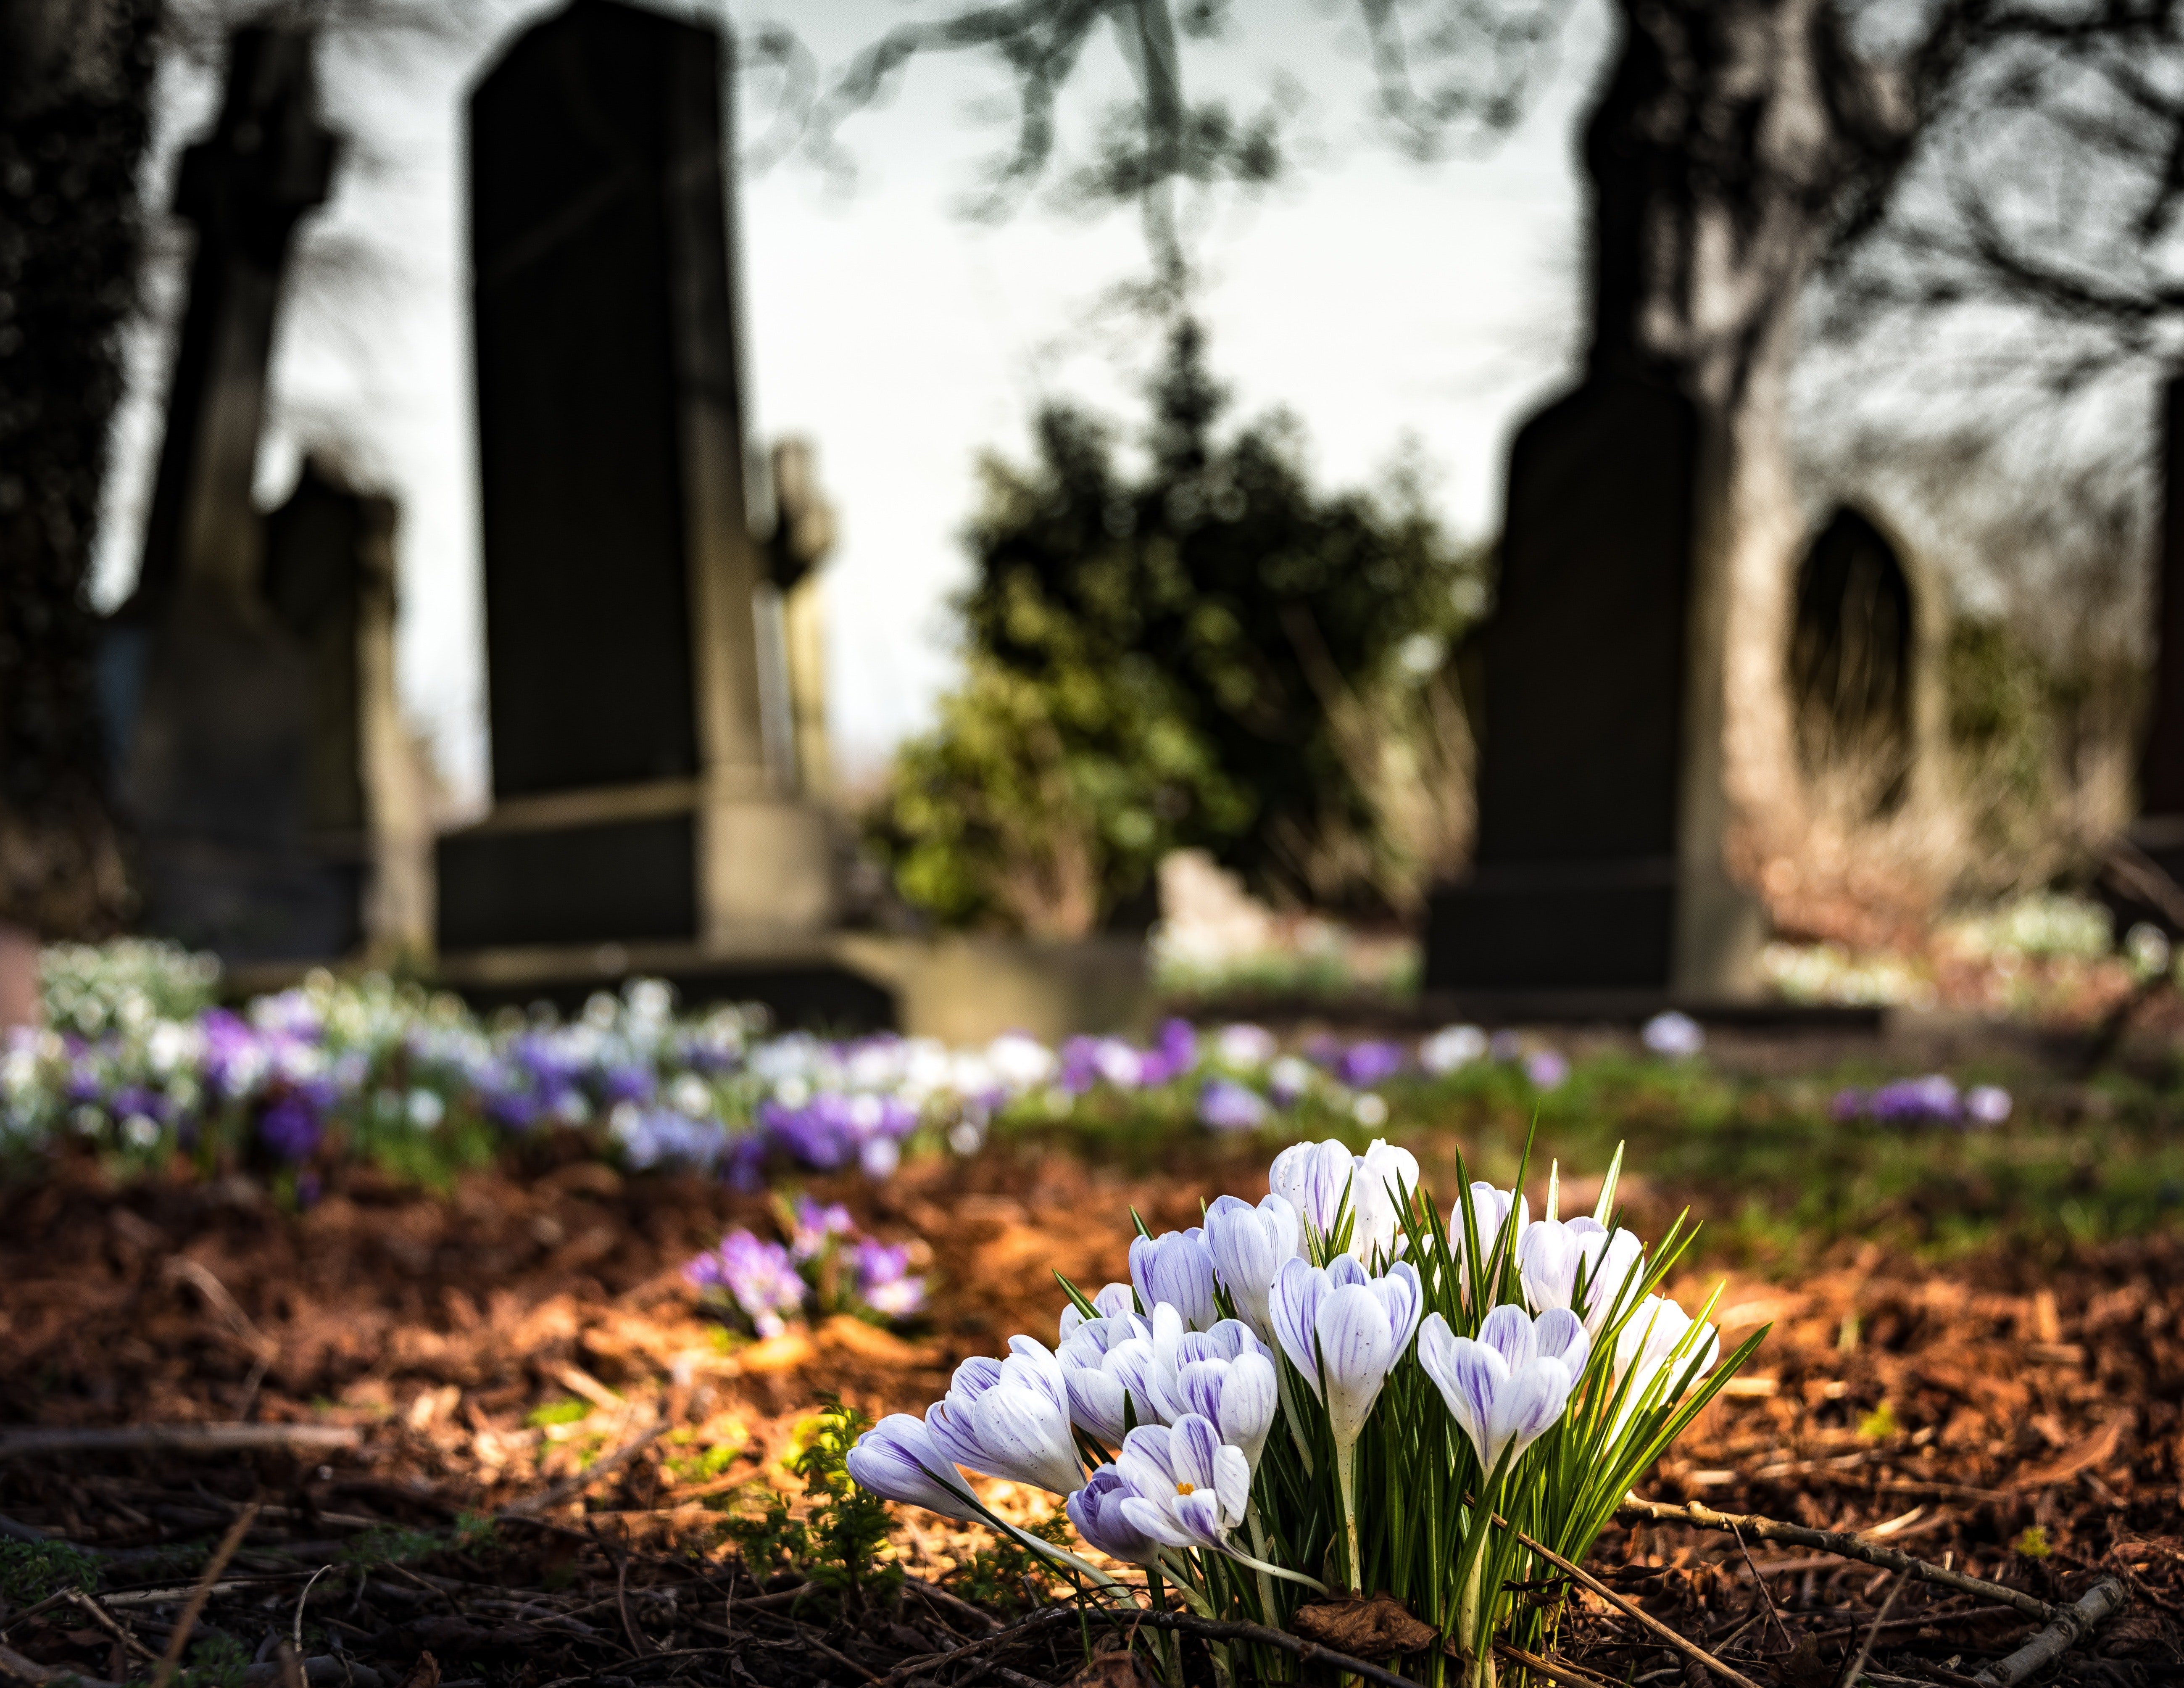 George decided to pay his dad a visit at the cemetery for the first time since he died. | Source: Pexels